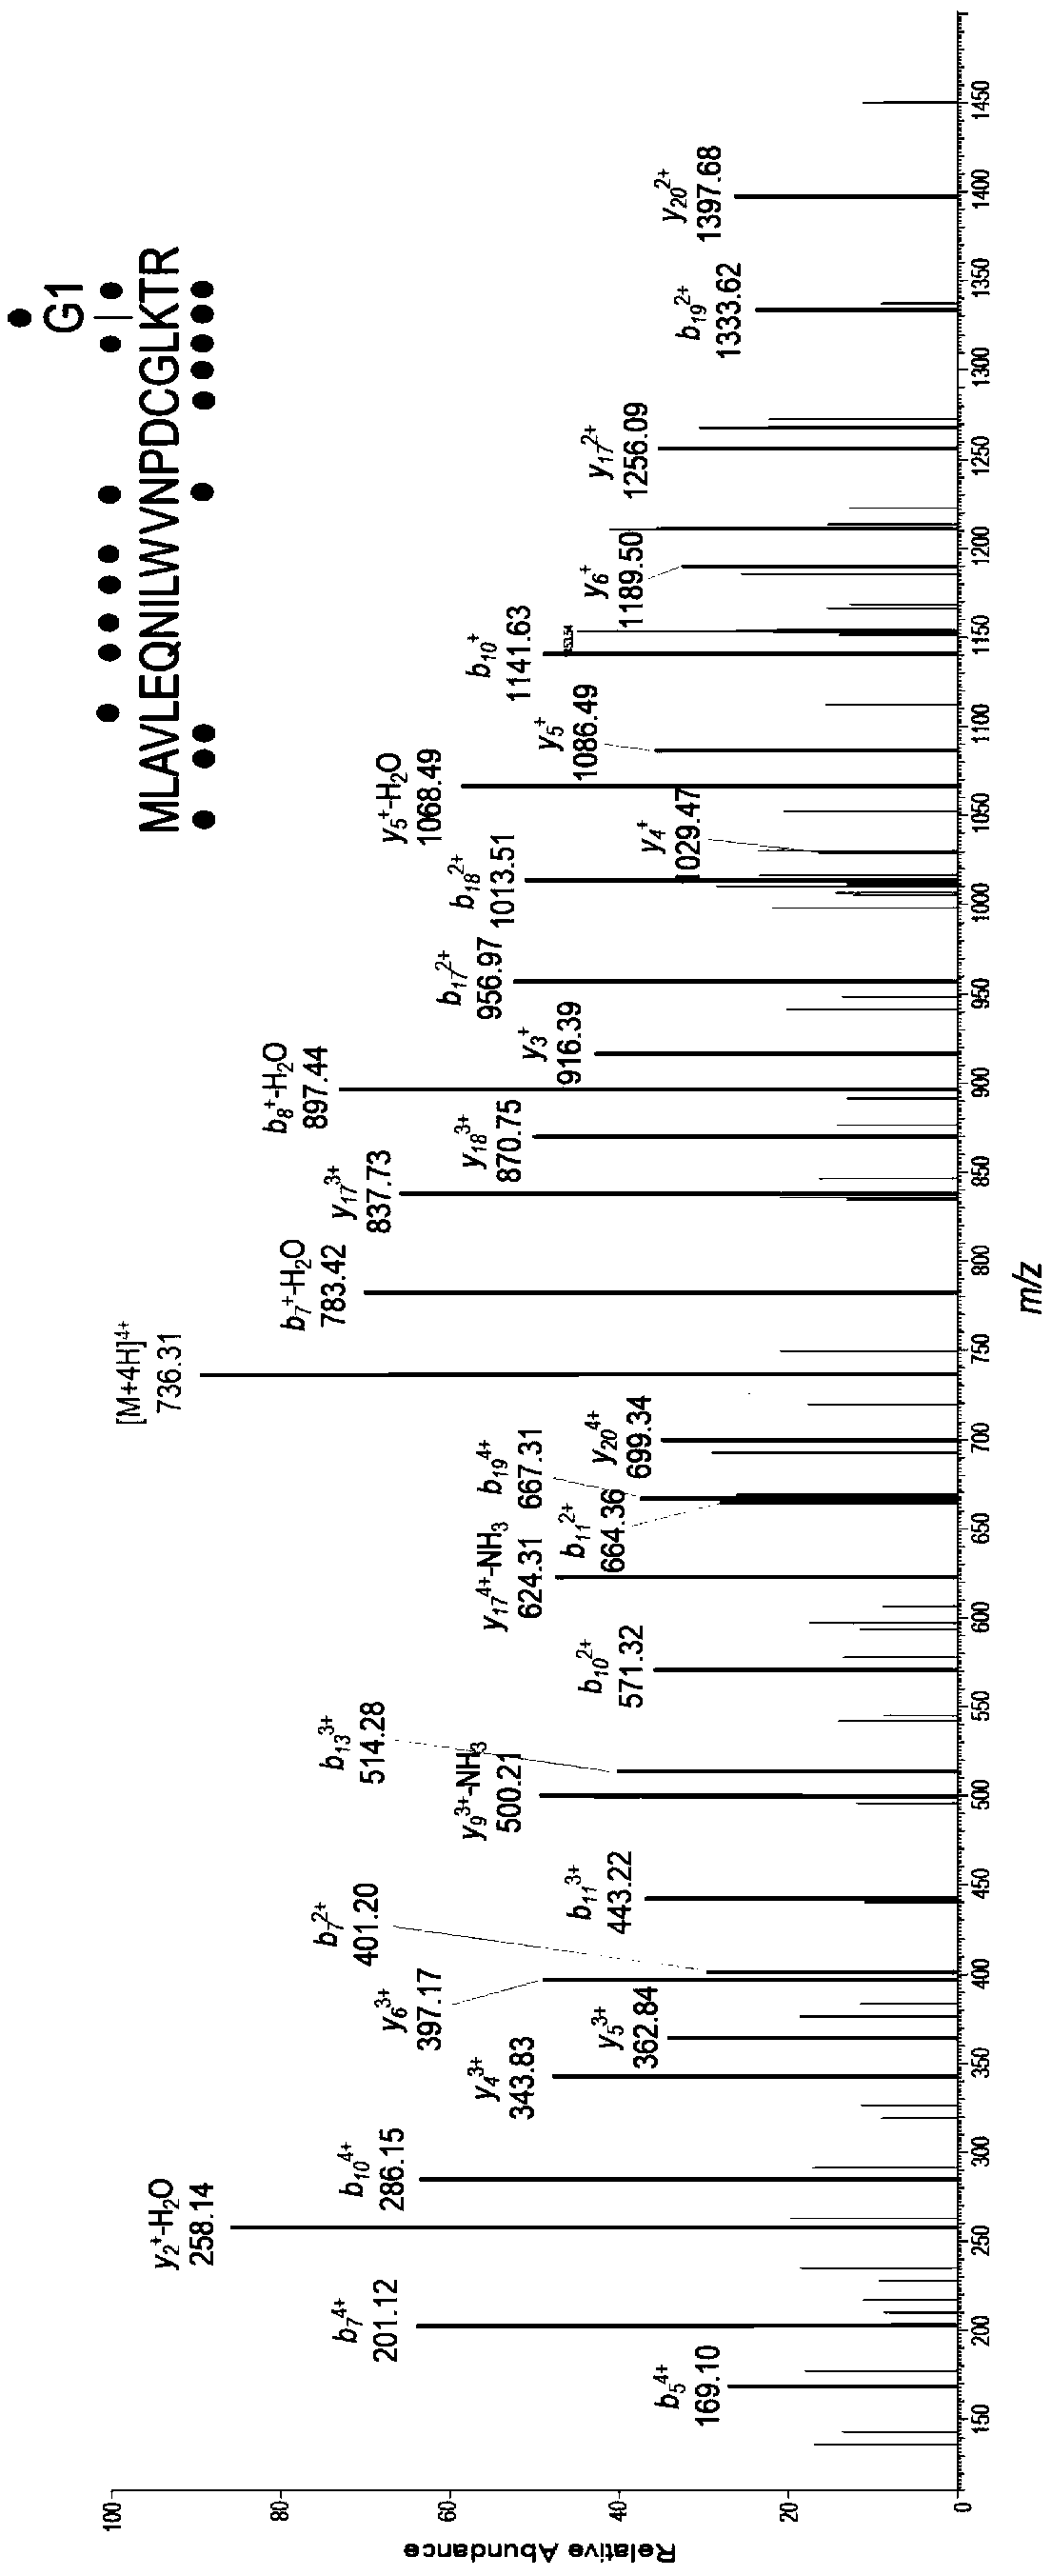 Molecular probe of higher plant non-cobalt-dependent methionine synthase and application of molecular probe